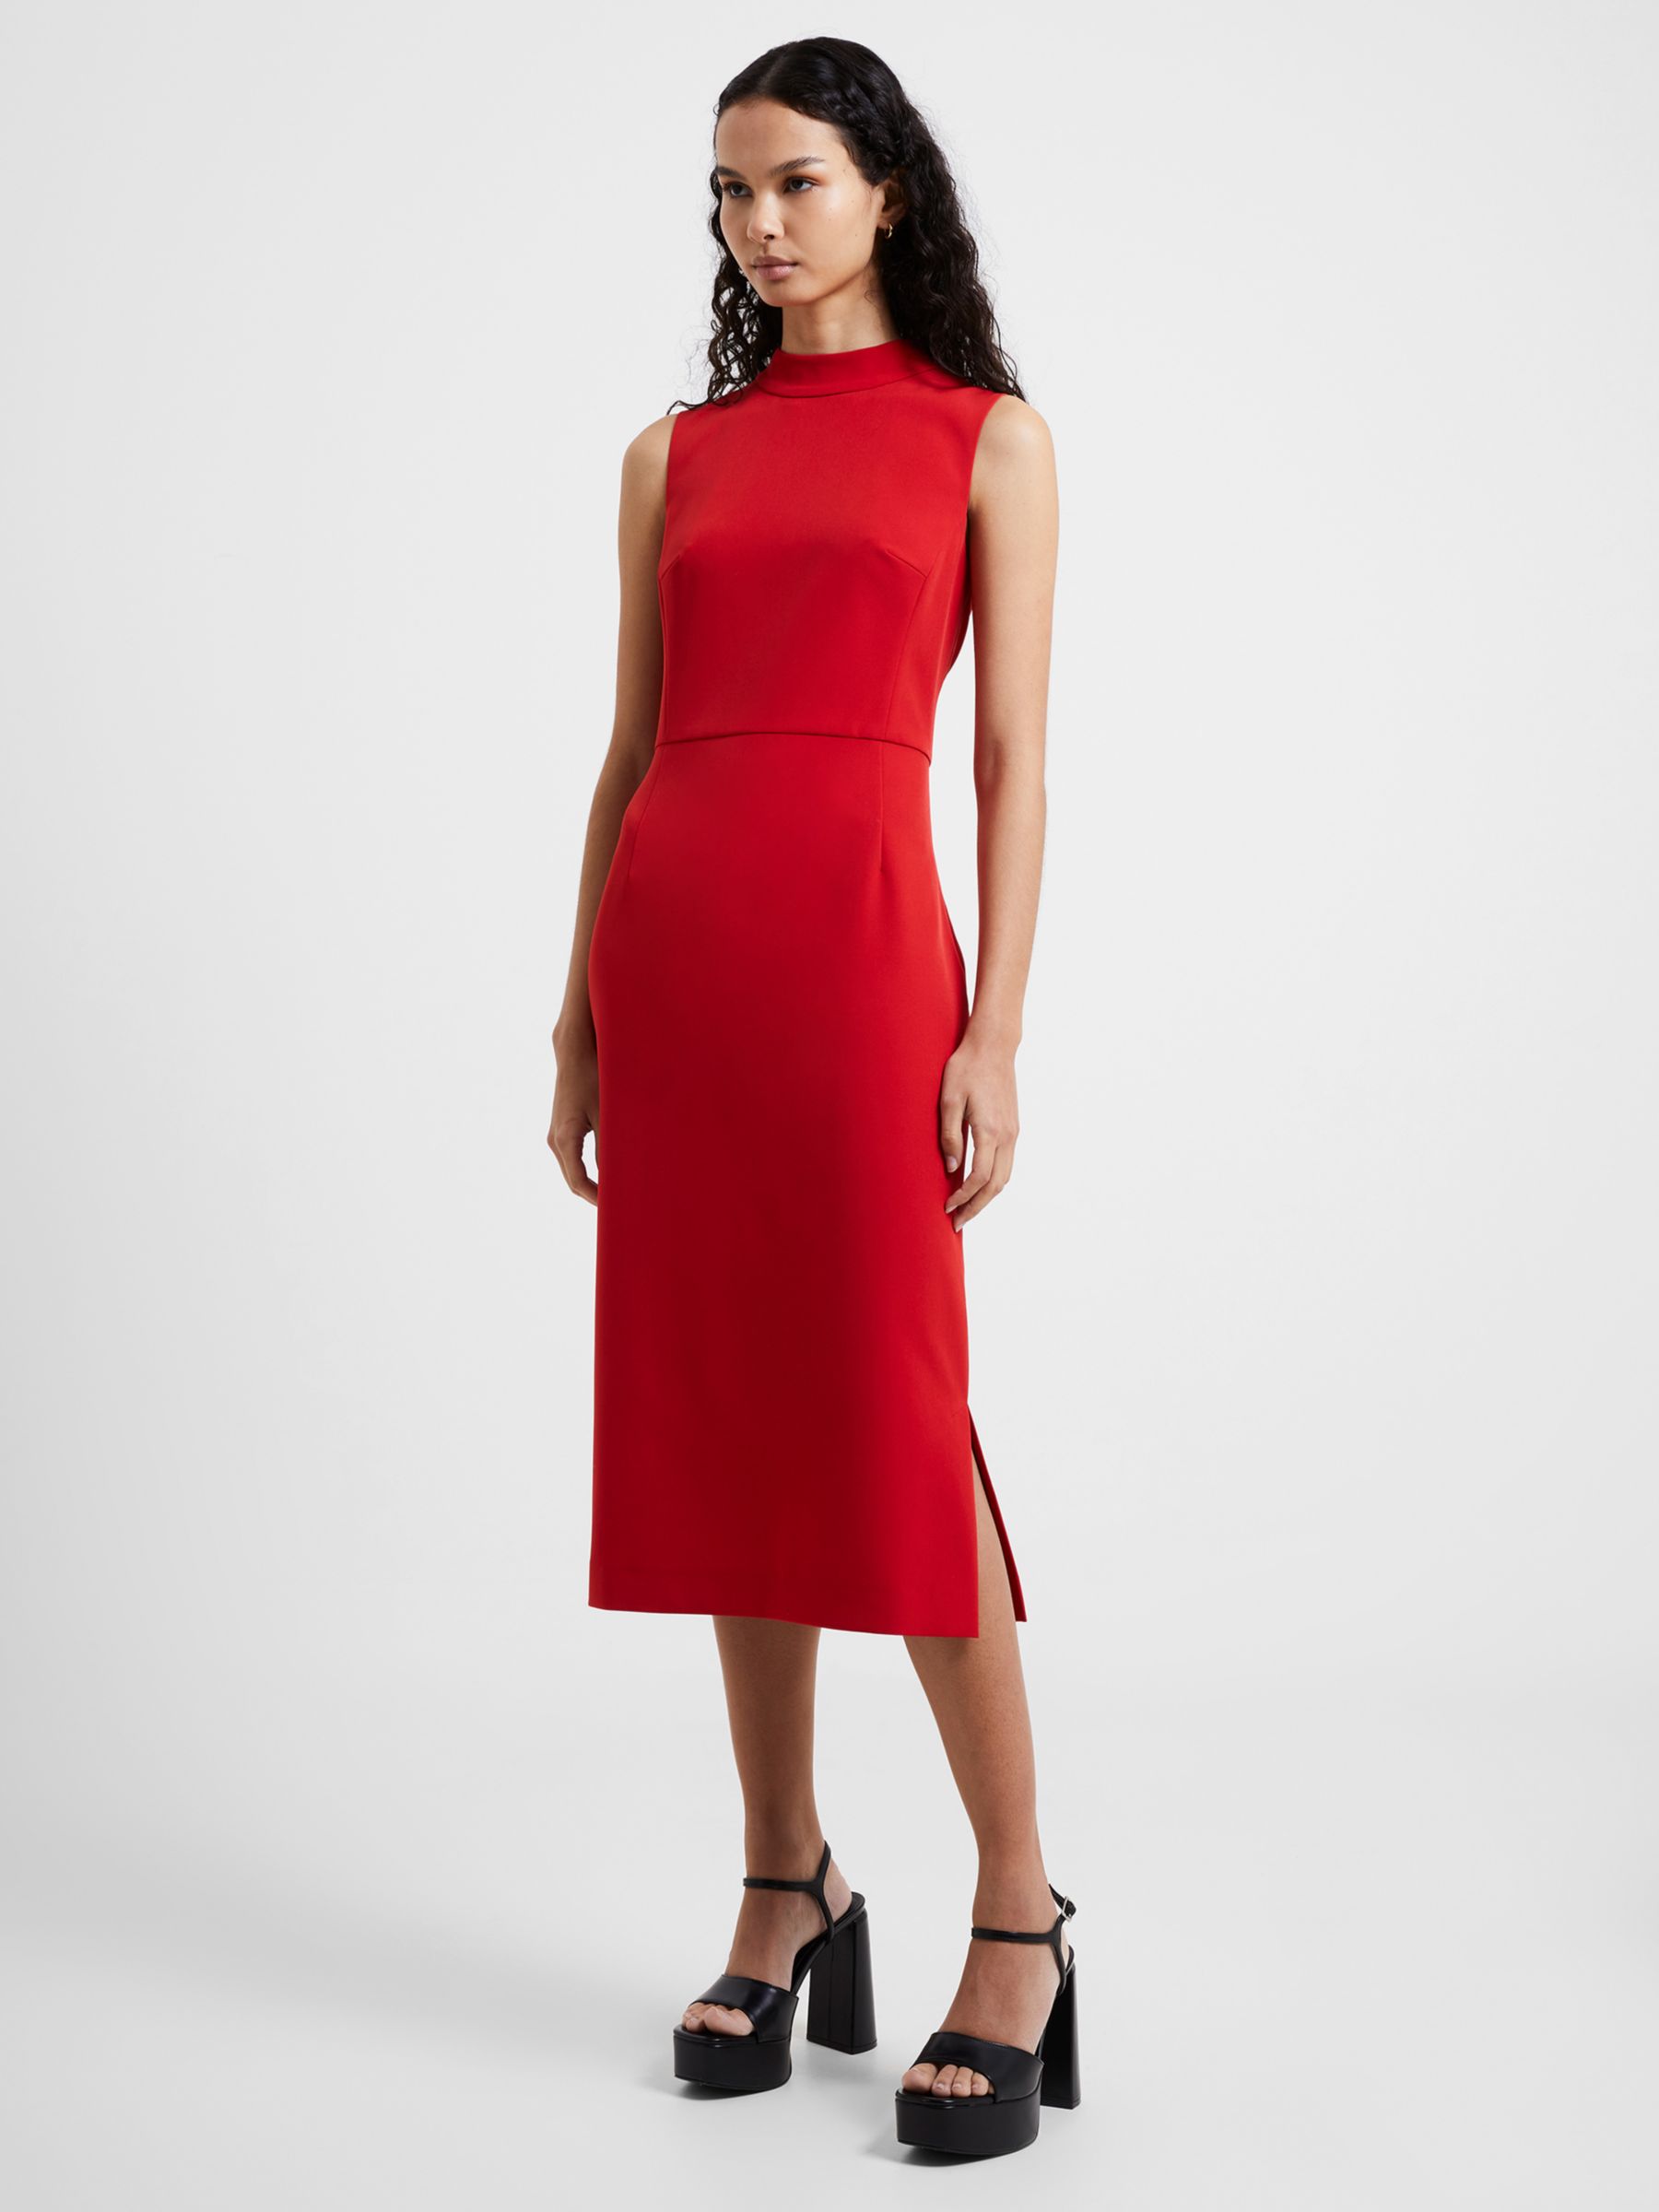 French Connection Echo Crepe Mock Neck Dress, Warm Red at John Lewis ...